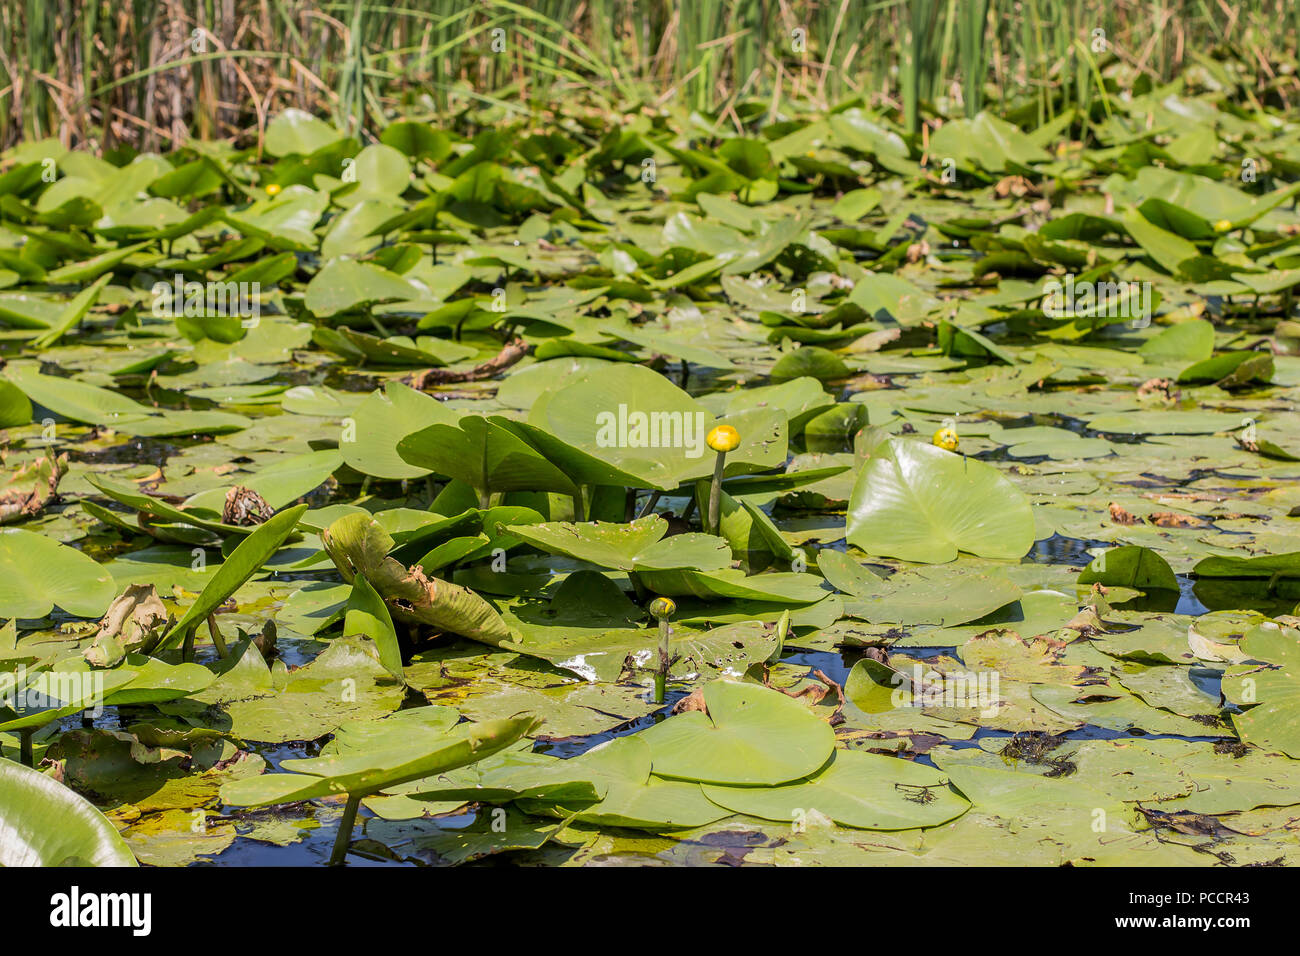 Floating leaves and yellow flowers of Nuphar lutea / yellow water lily Stock Photo